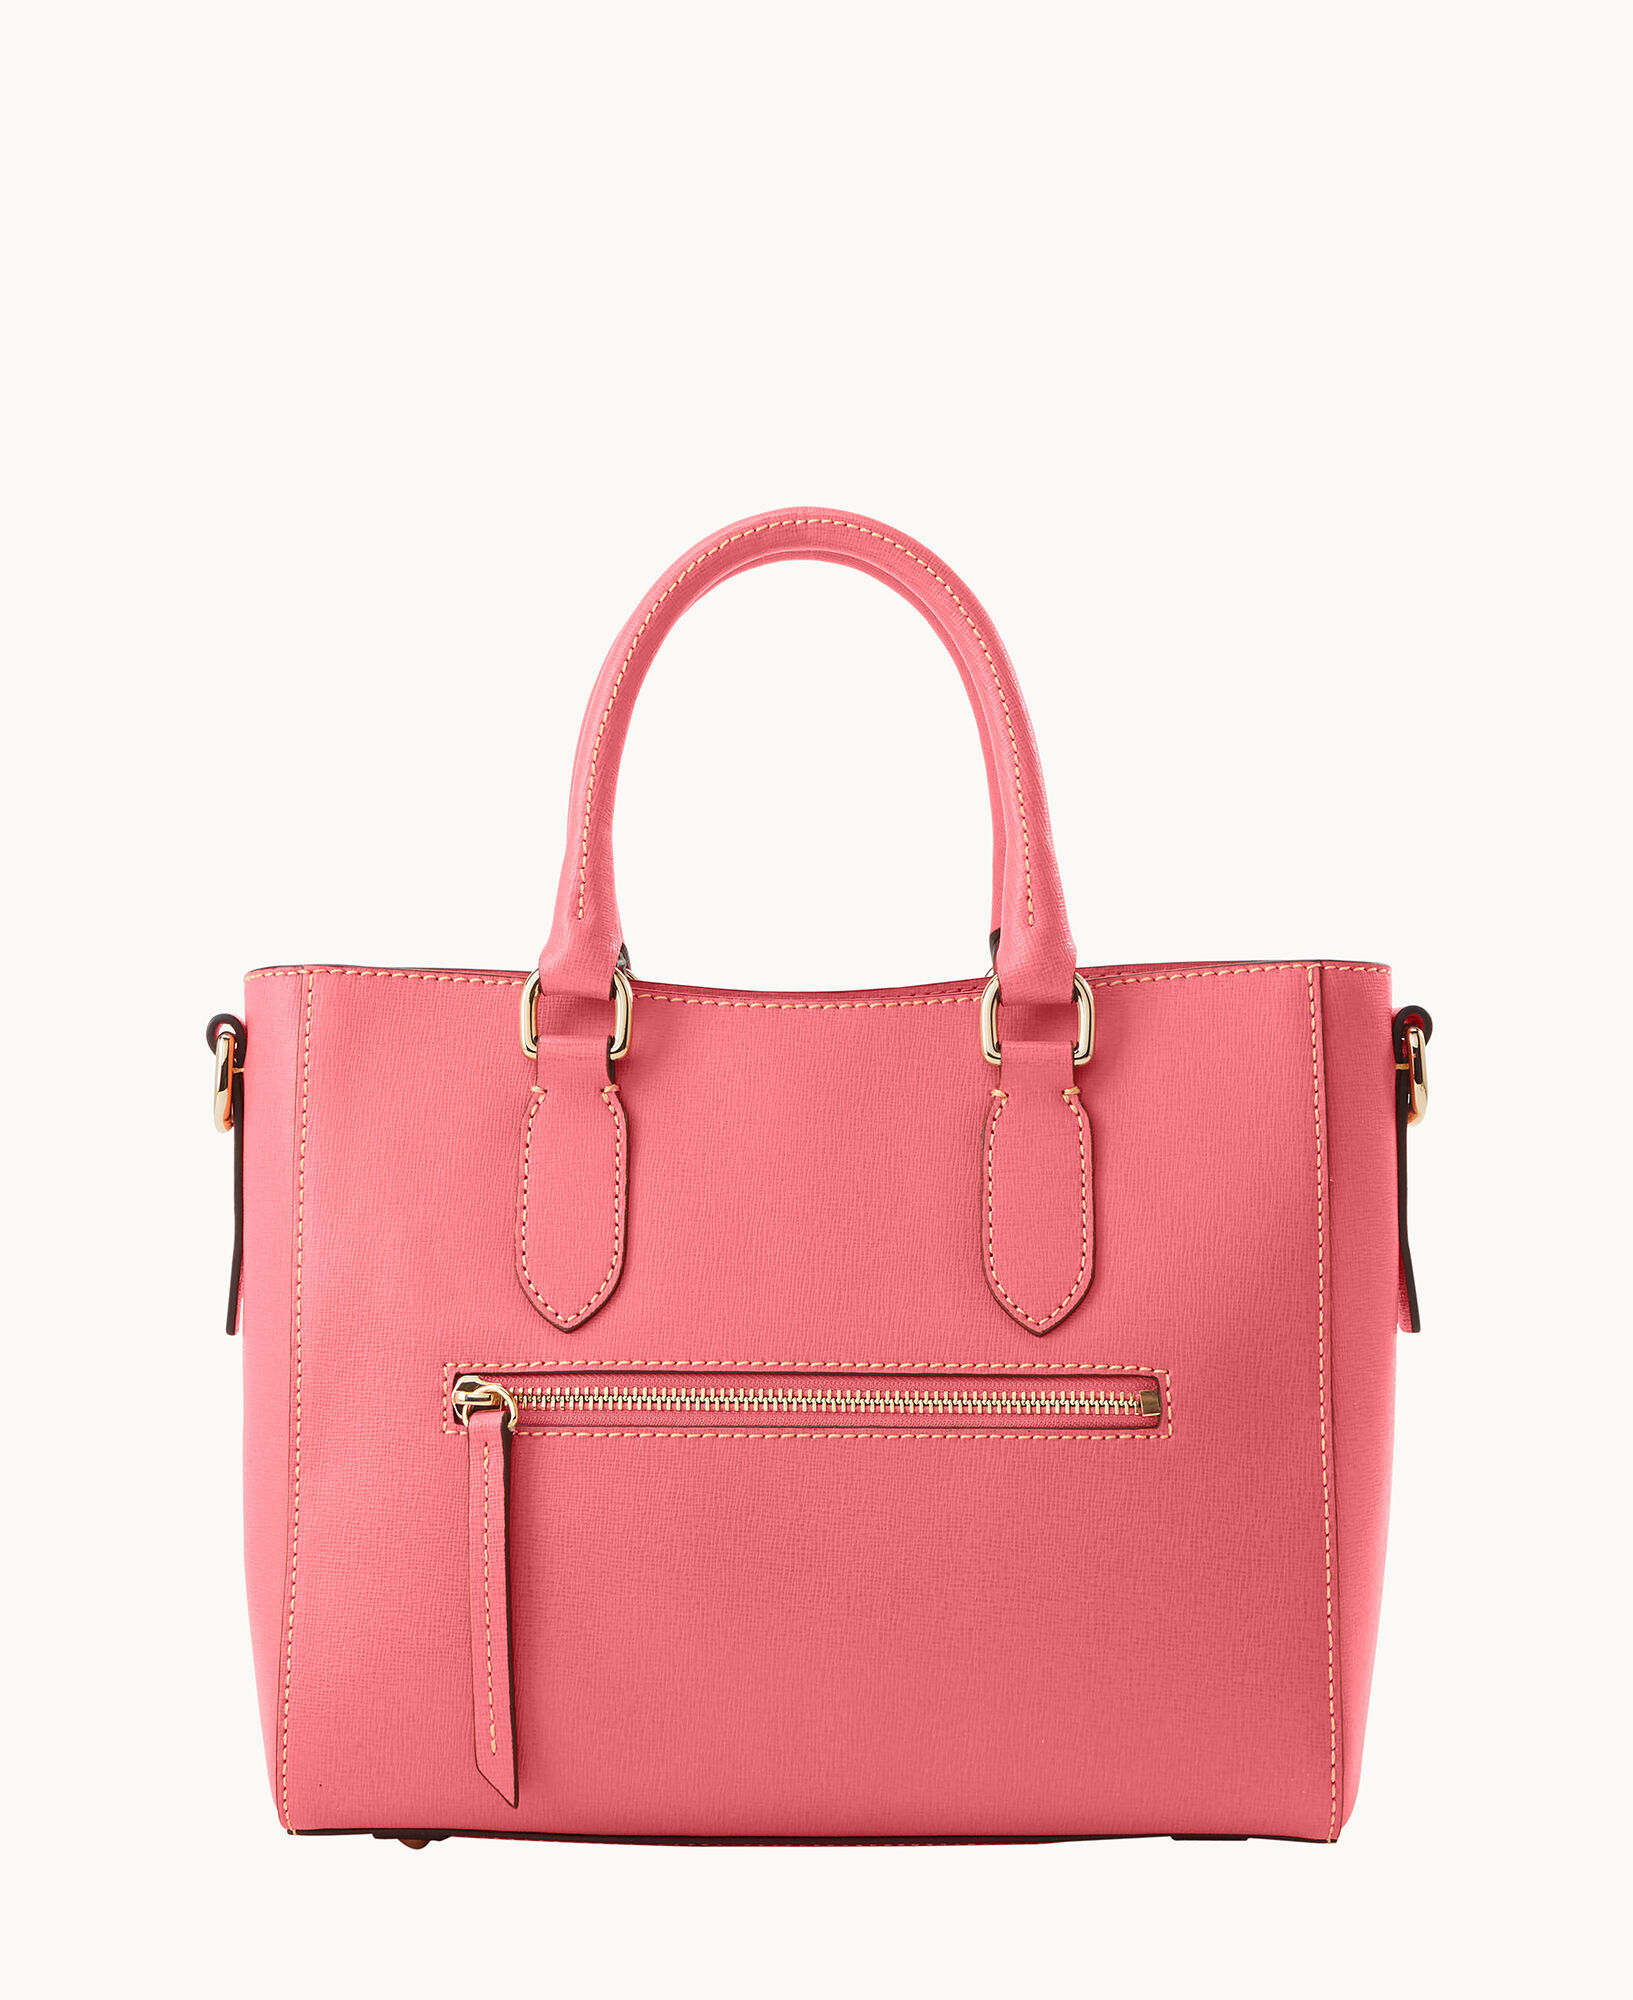 Kate Spade Handbags, Sunglasses and More Are Up to 75% Off at